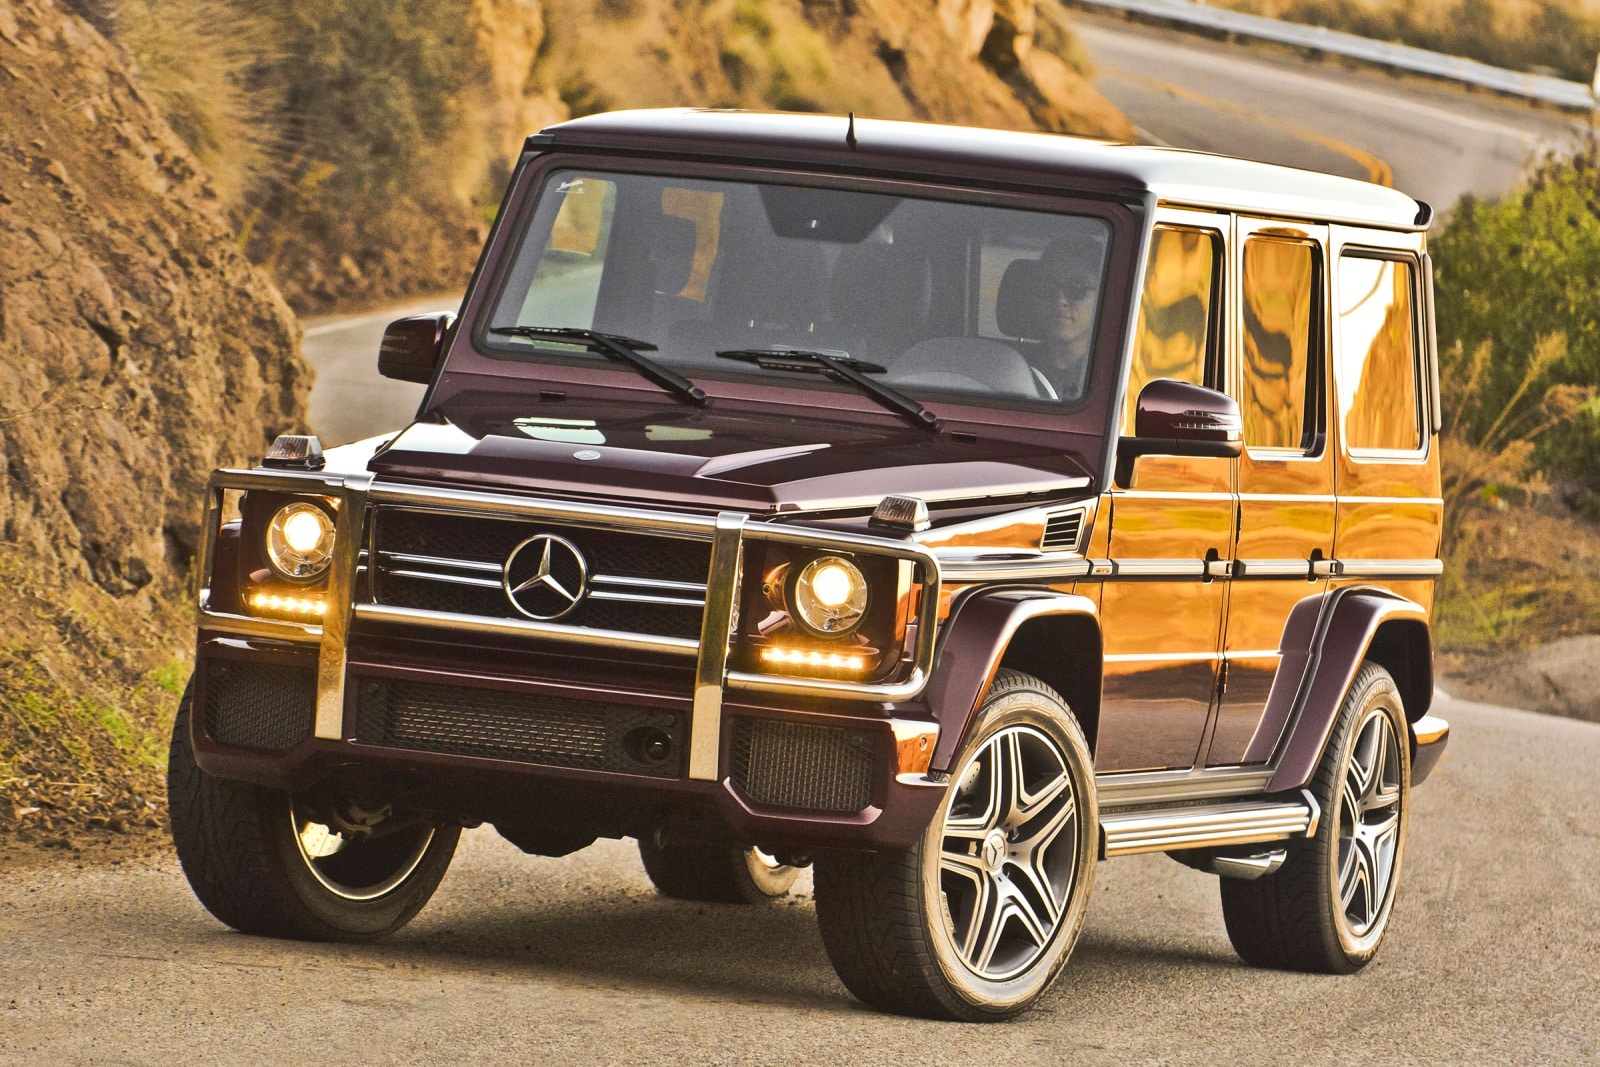 Used 2017 Mercedes-Benz G-Class Review & Ratings | Edmunds